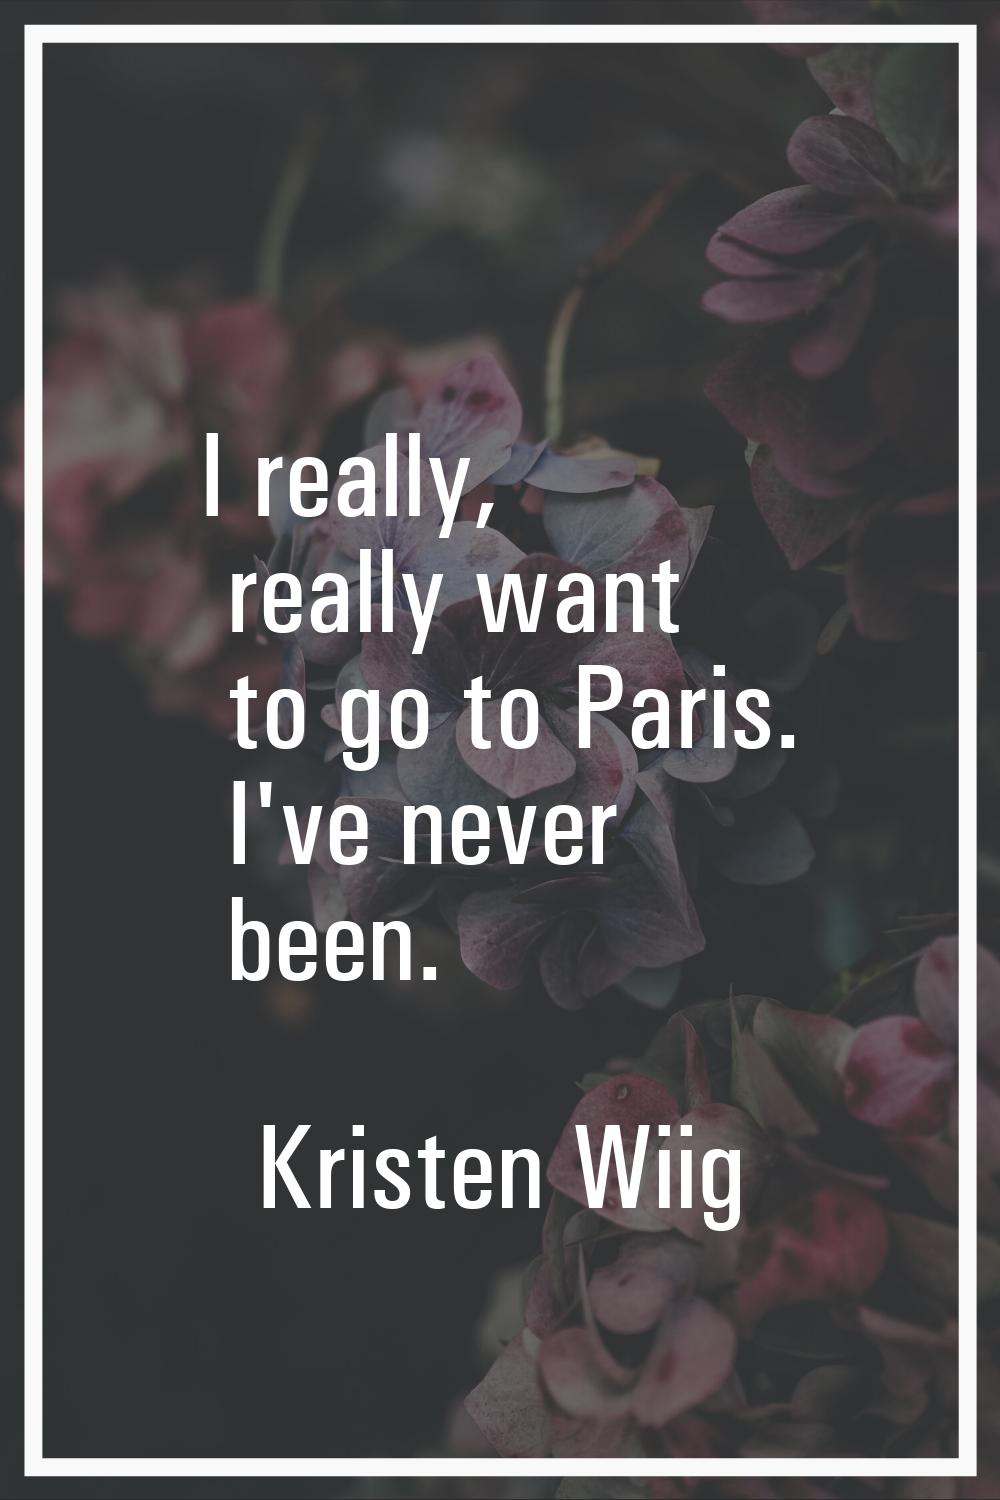 I really, really want to go to Paris. I've never been.